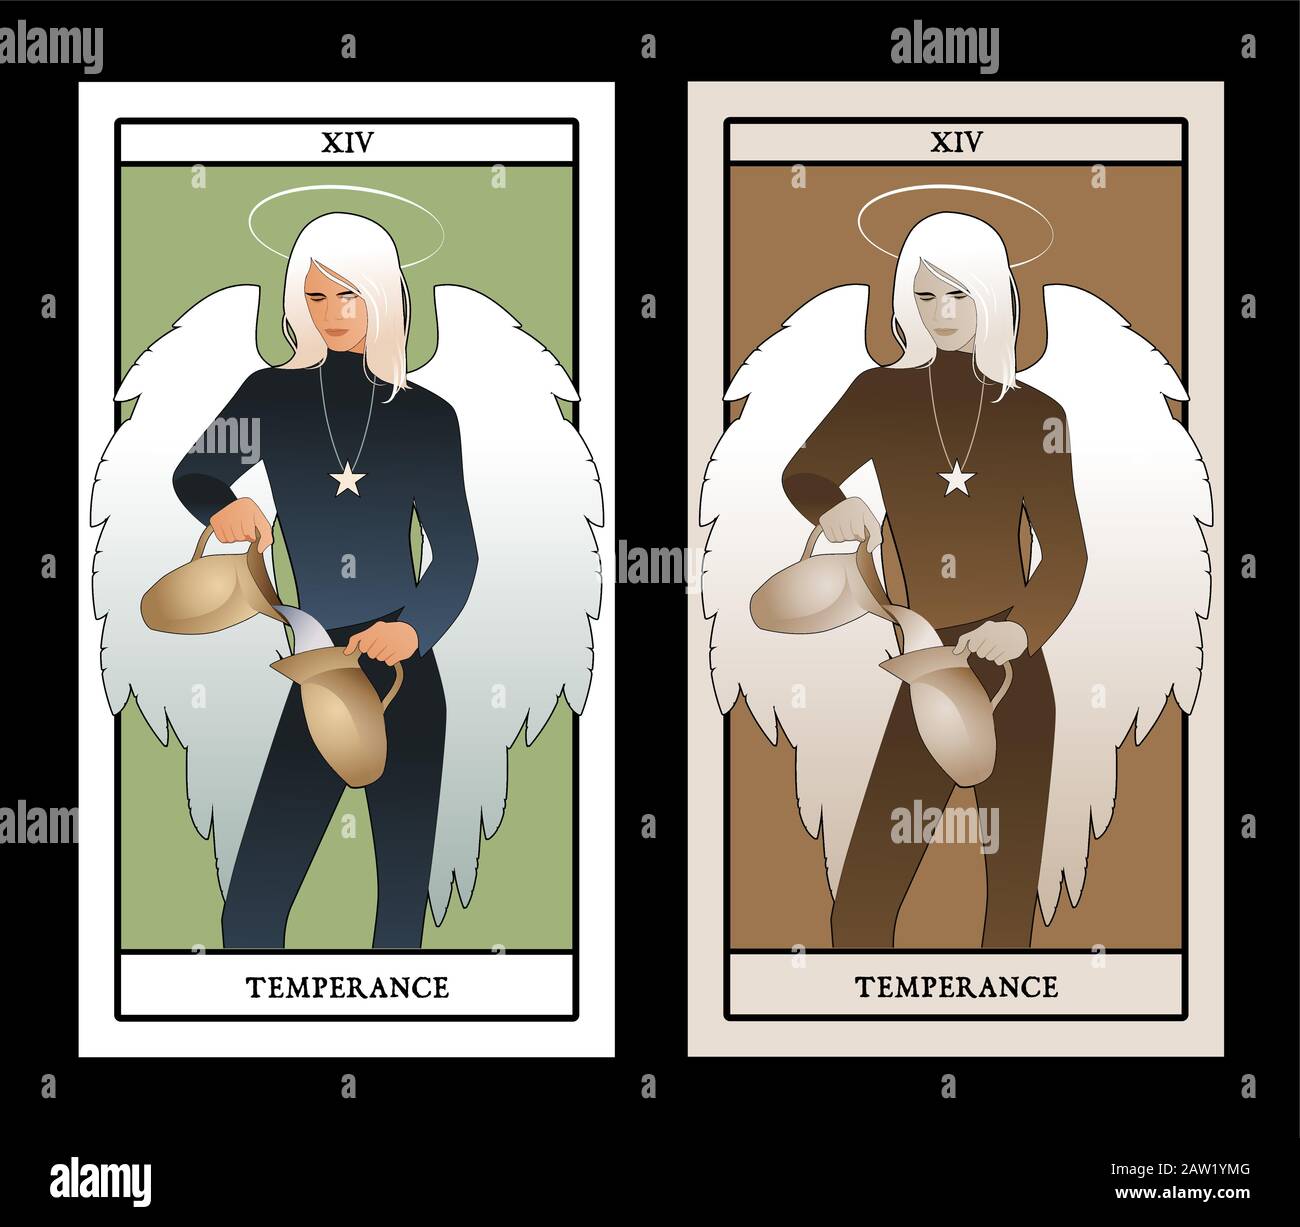 Major Arcana Tarot Cards. Temperance. Angel with appearance and clothes of young man, great wings, hair fair, pouring water from one jug to another Stock Vector